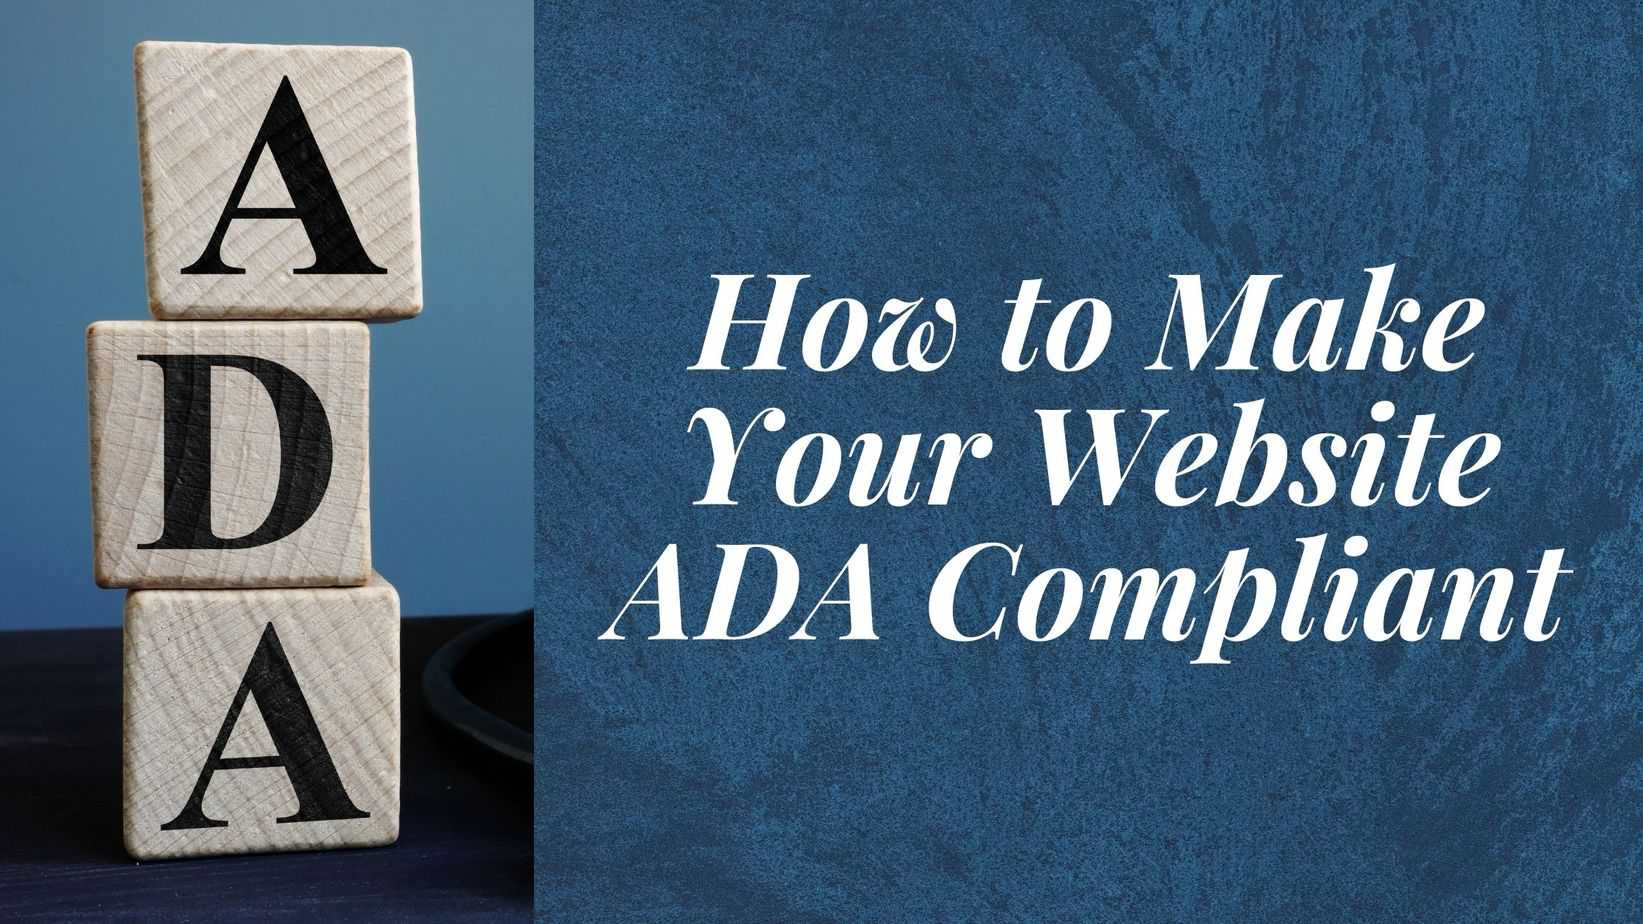 Featured image for “How to Make Your Website ADA Compliant”